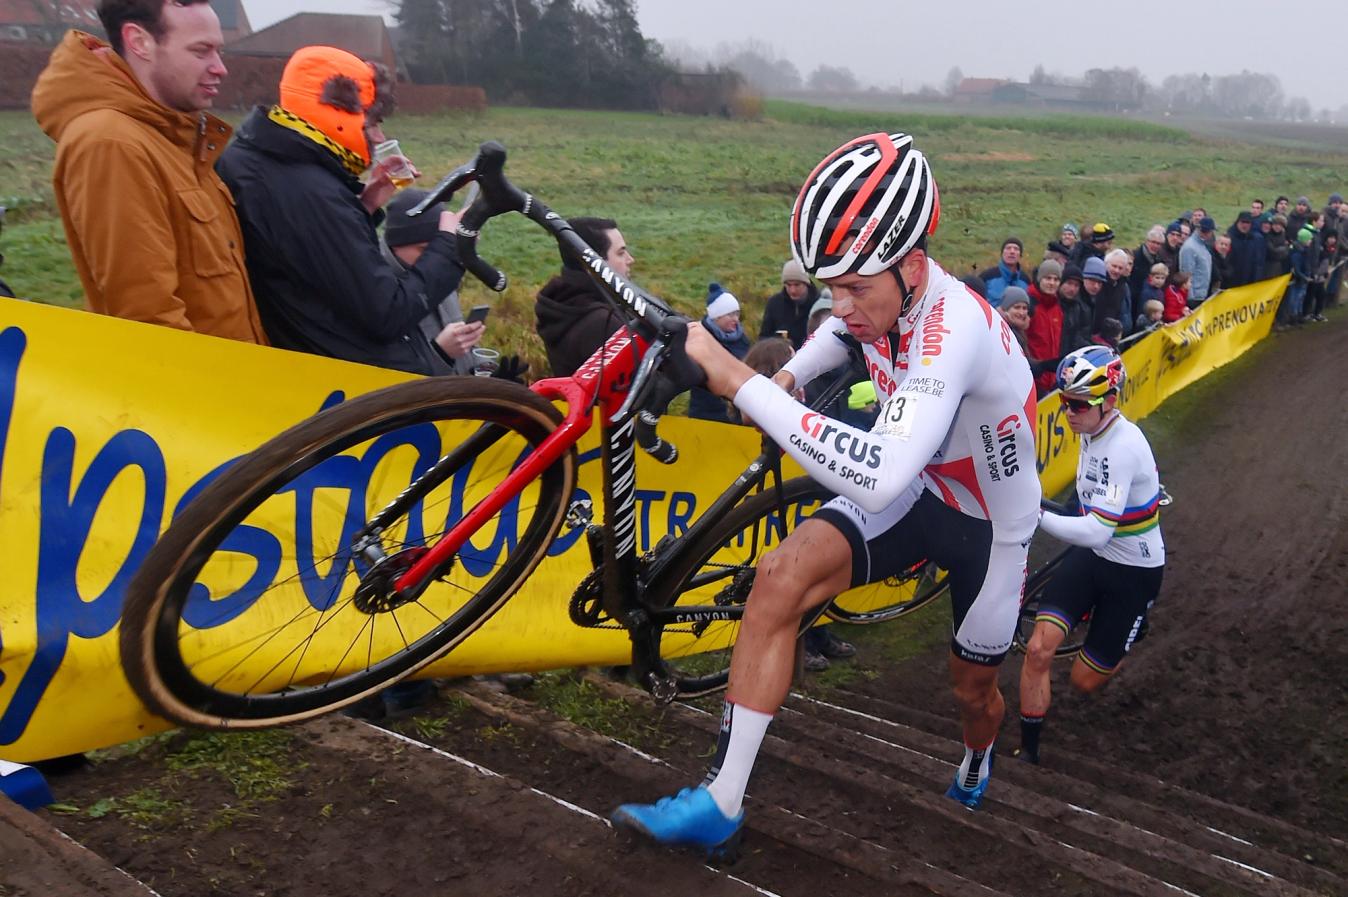 Often seen battling the likes of Wout van Aert (Jumbo-Visma), fans will be delighted to see Tom Meeusen return to the CX ranks